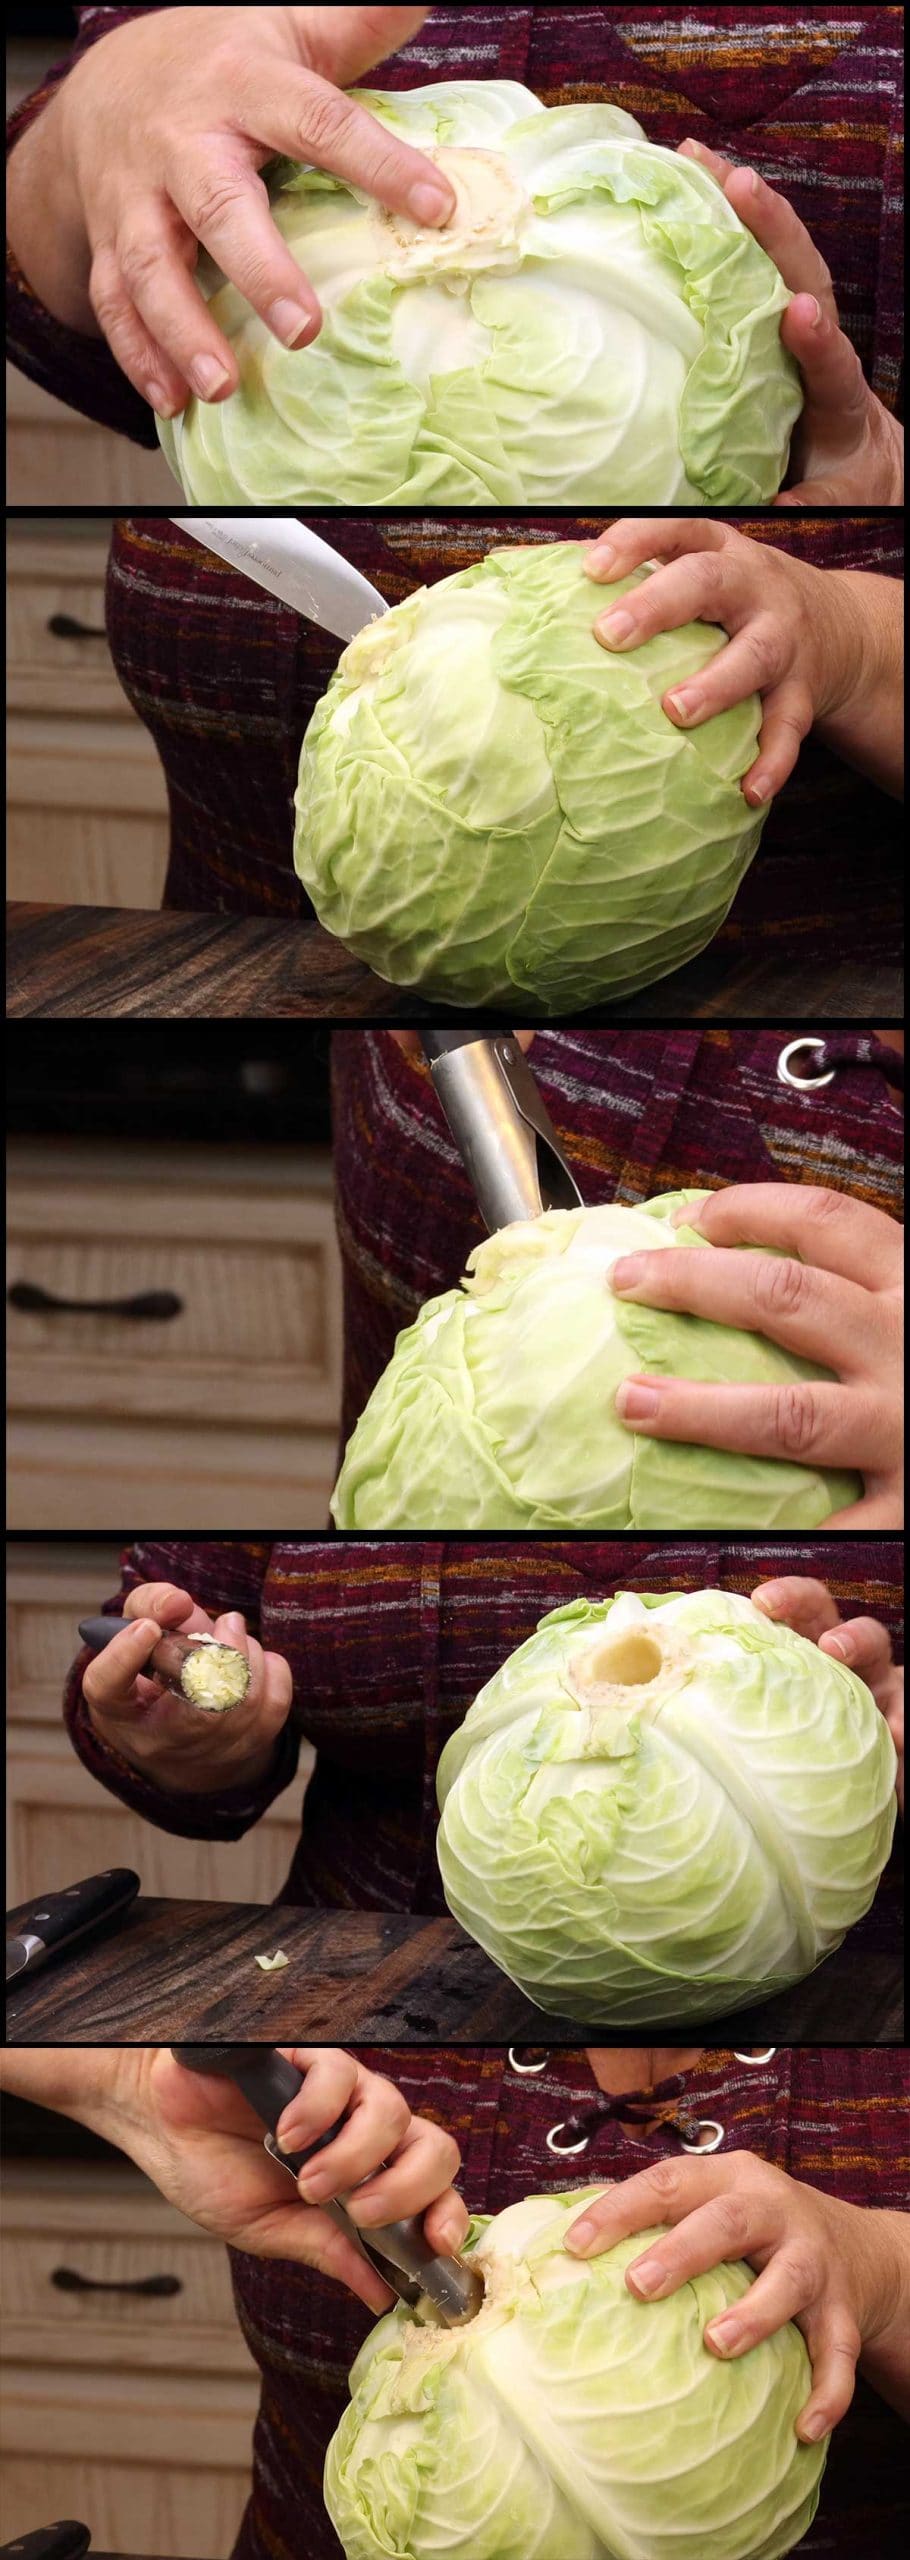 removing the core of the cabbage